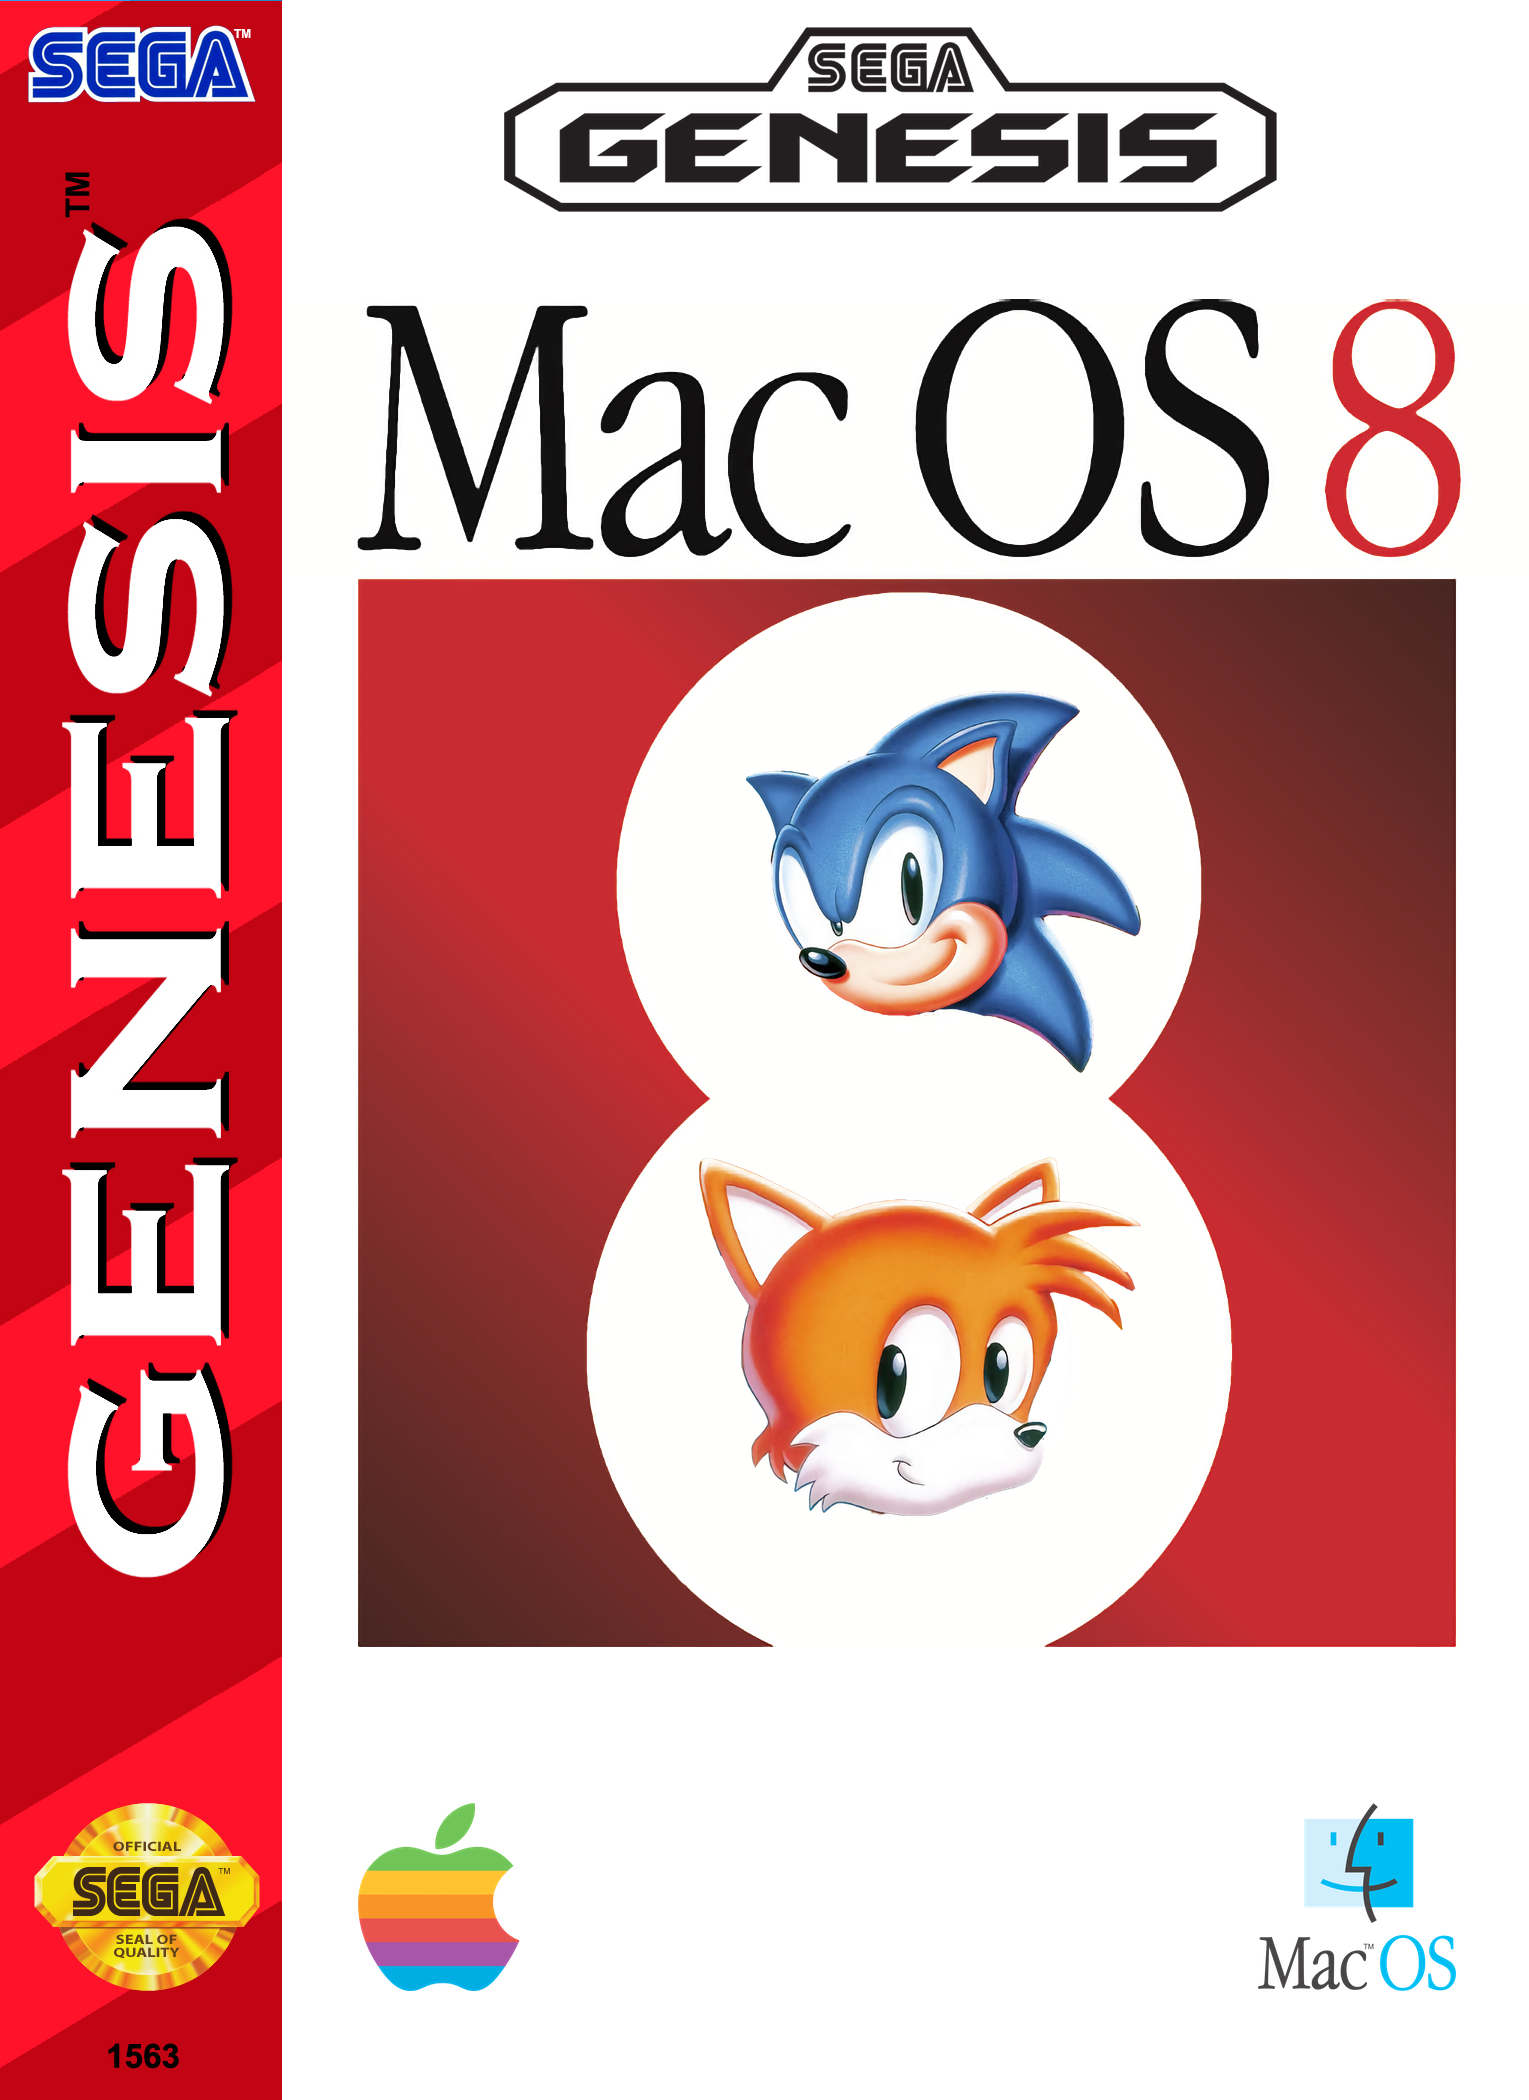 Sonic & Tails version of Mac OS 8 for the Sega Genesis